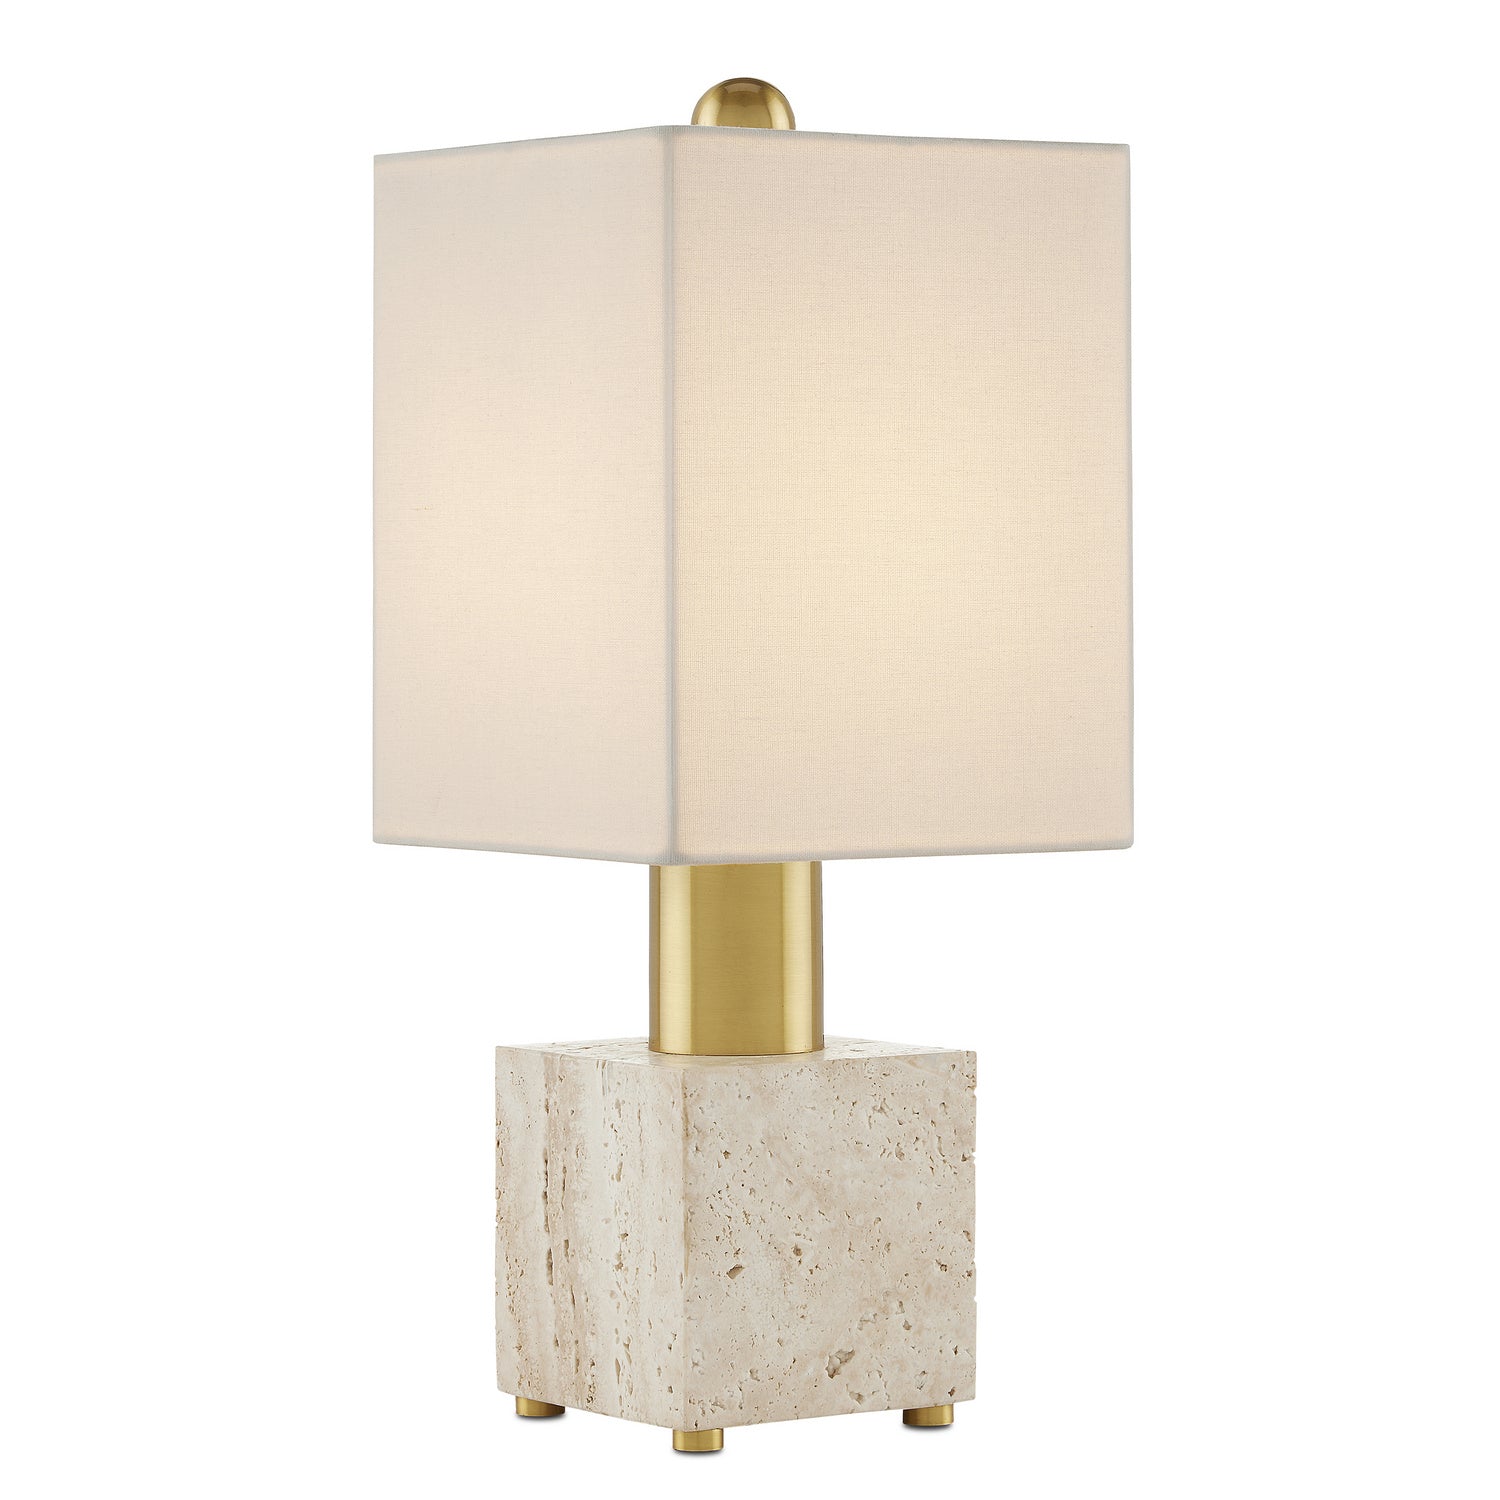 One Light Table Lamp from the Gentini collection in Beige/Antique Brass finish